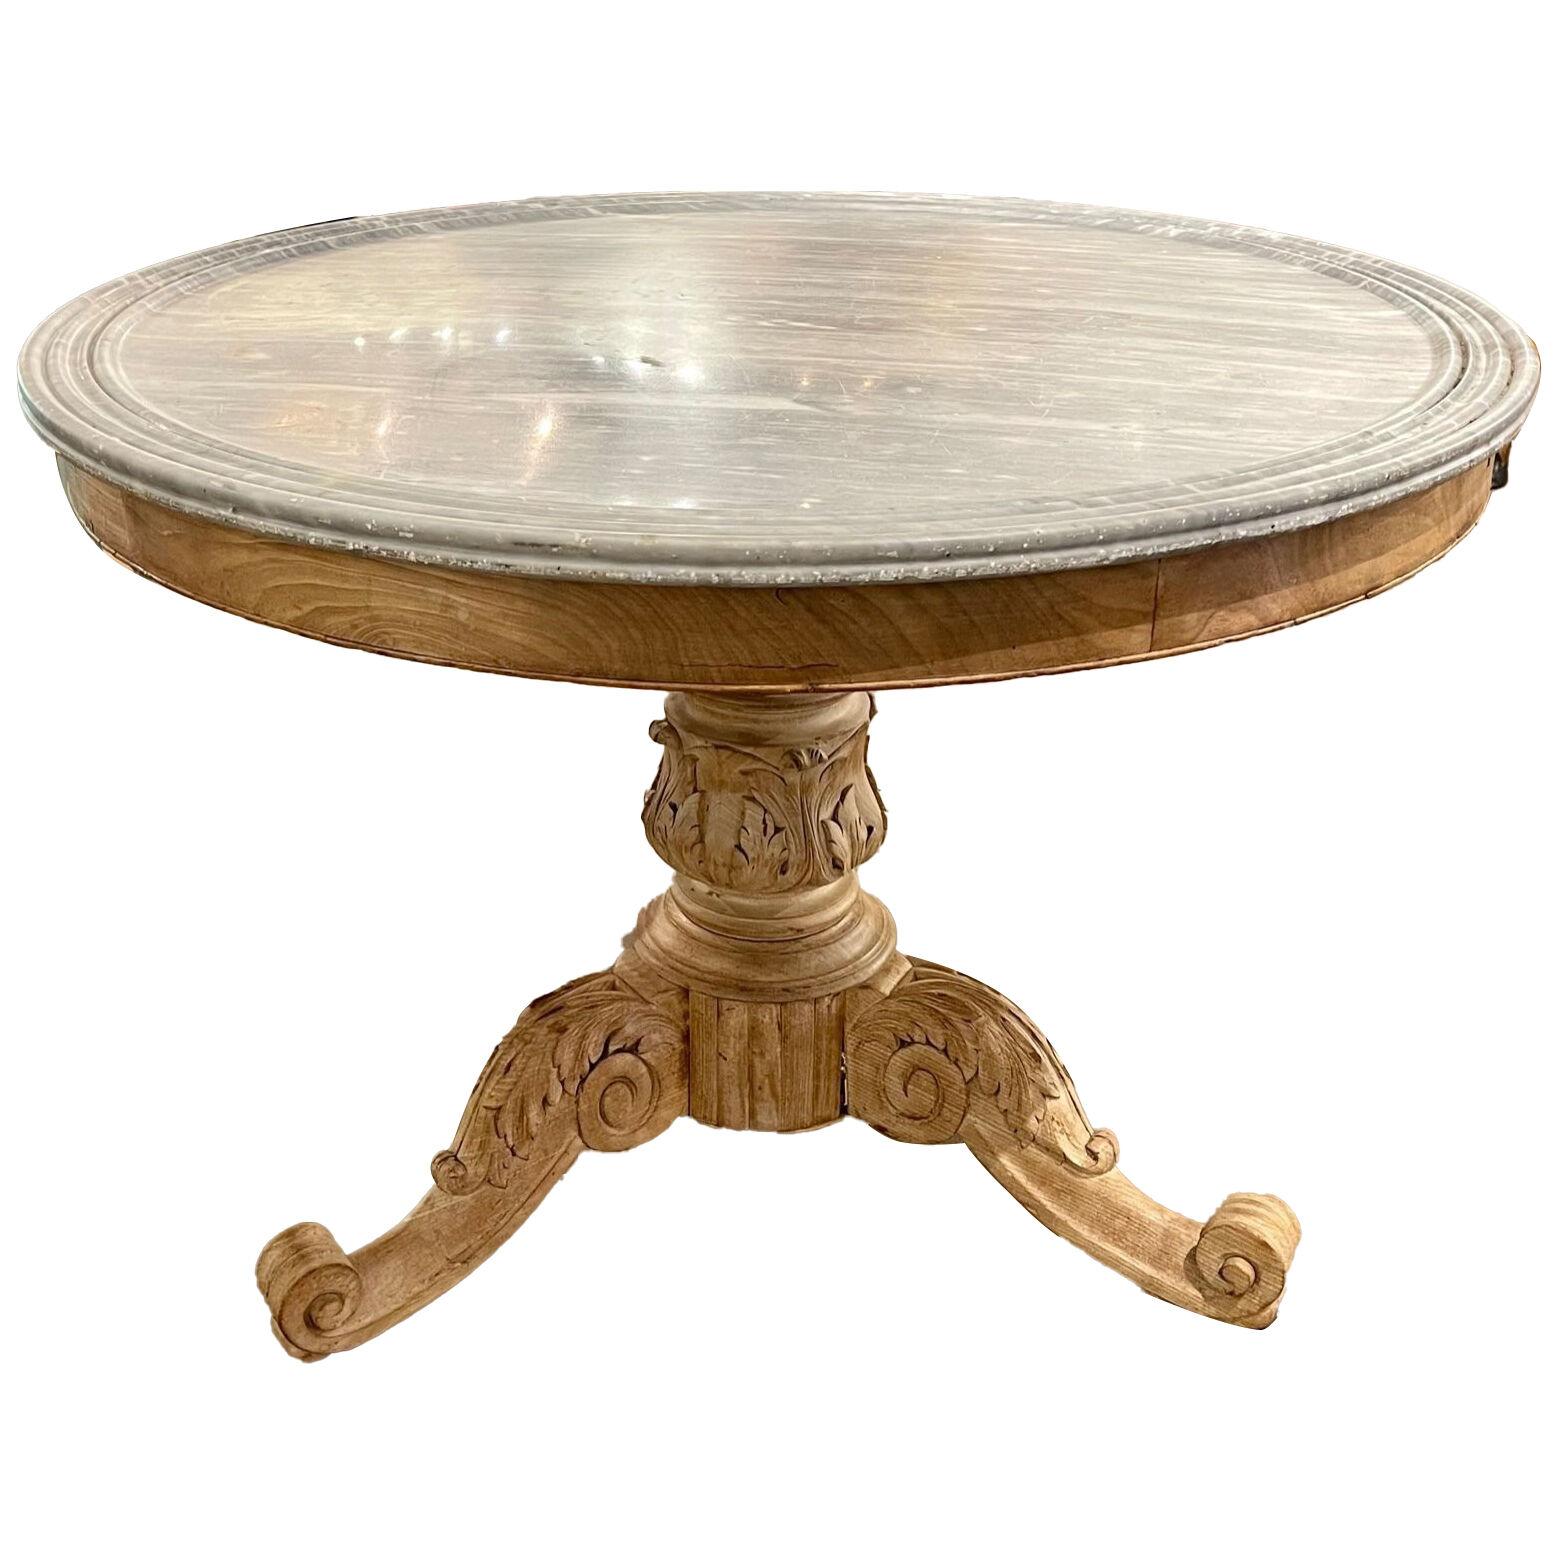 19th Century French Carved and Bleached Walnut and Marble Center Table